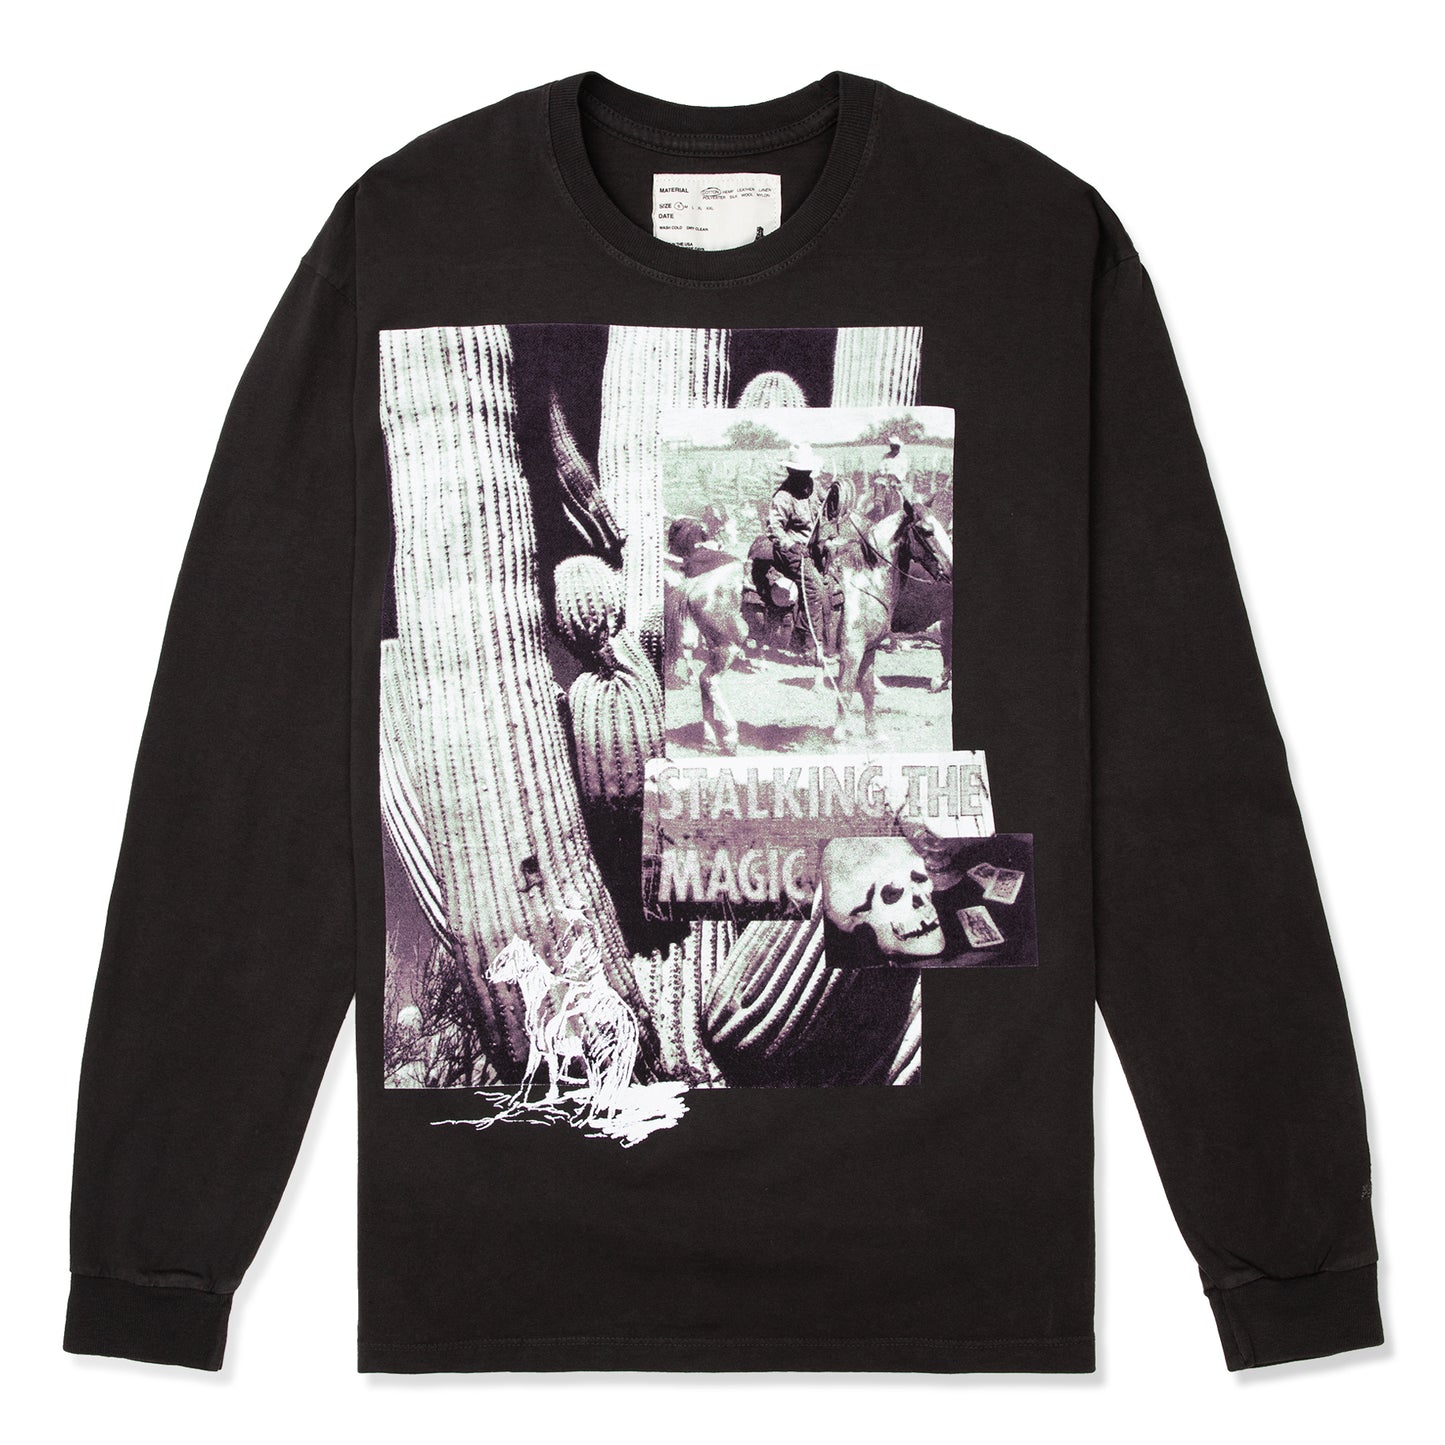 ONE OF THESE DAYS Stalking the Magic Long Sleeve (Black)